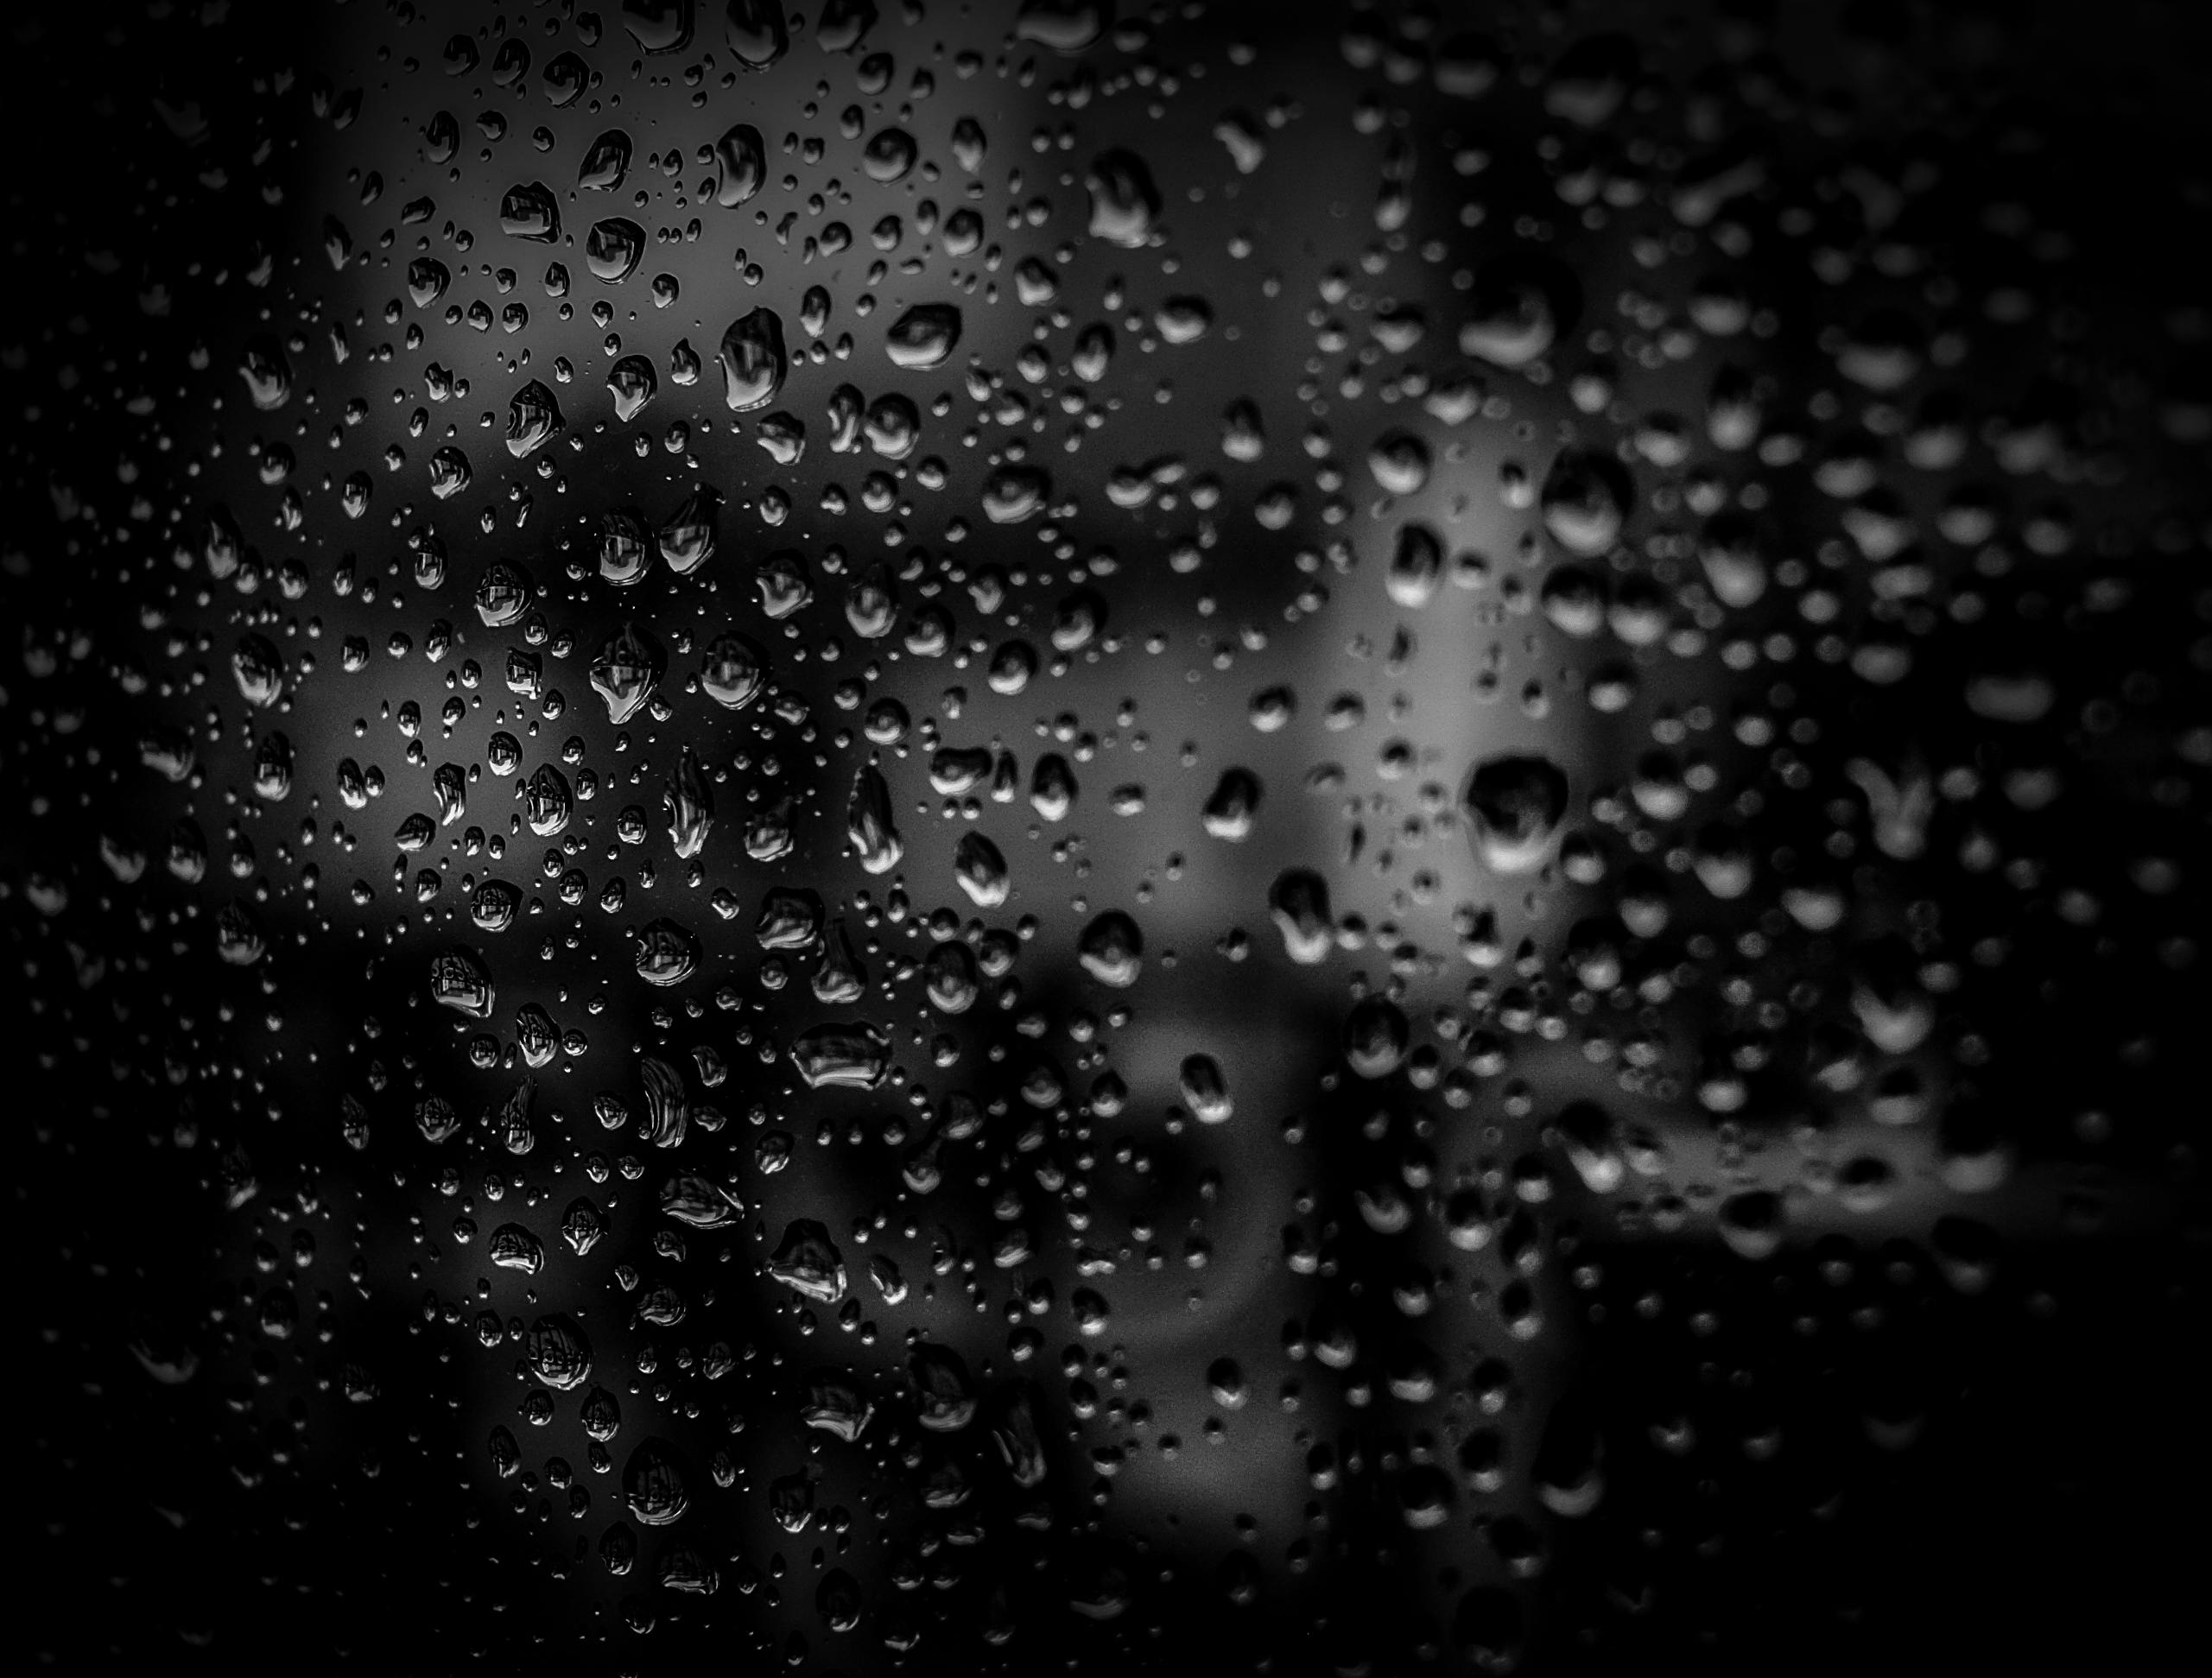 Raindrops Photos, Download The BEST Free Raindrops Stock Photos & HD Images